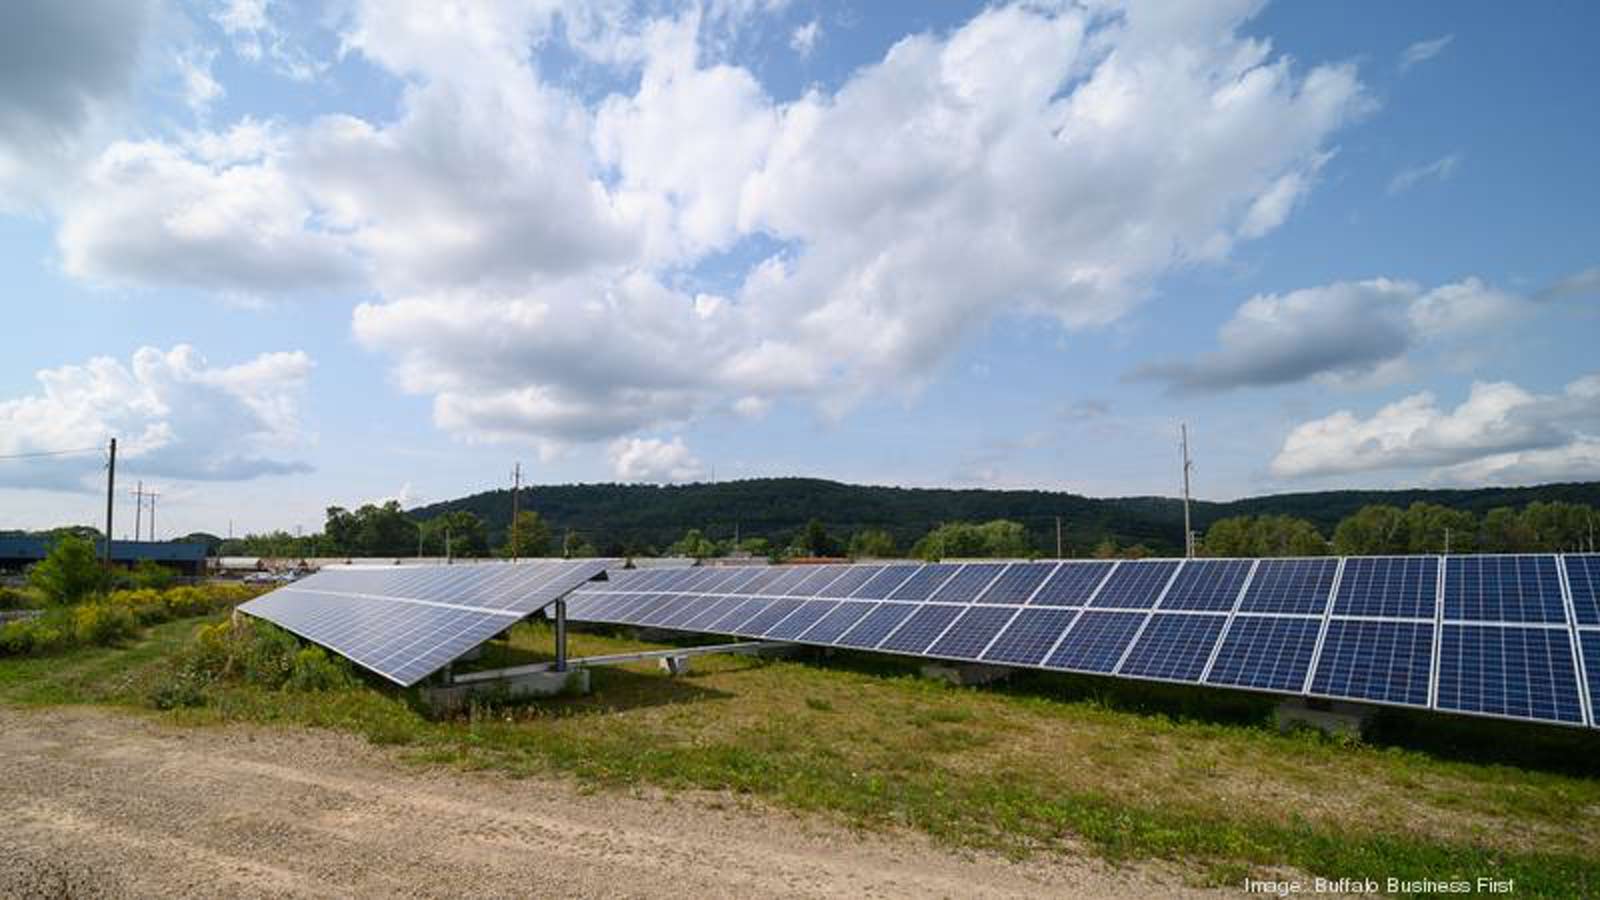 WNY solar companies prepare for growth as governments emphasize clean energy